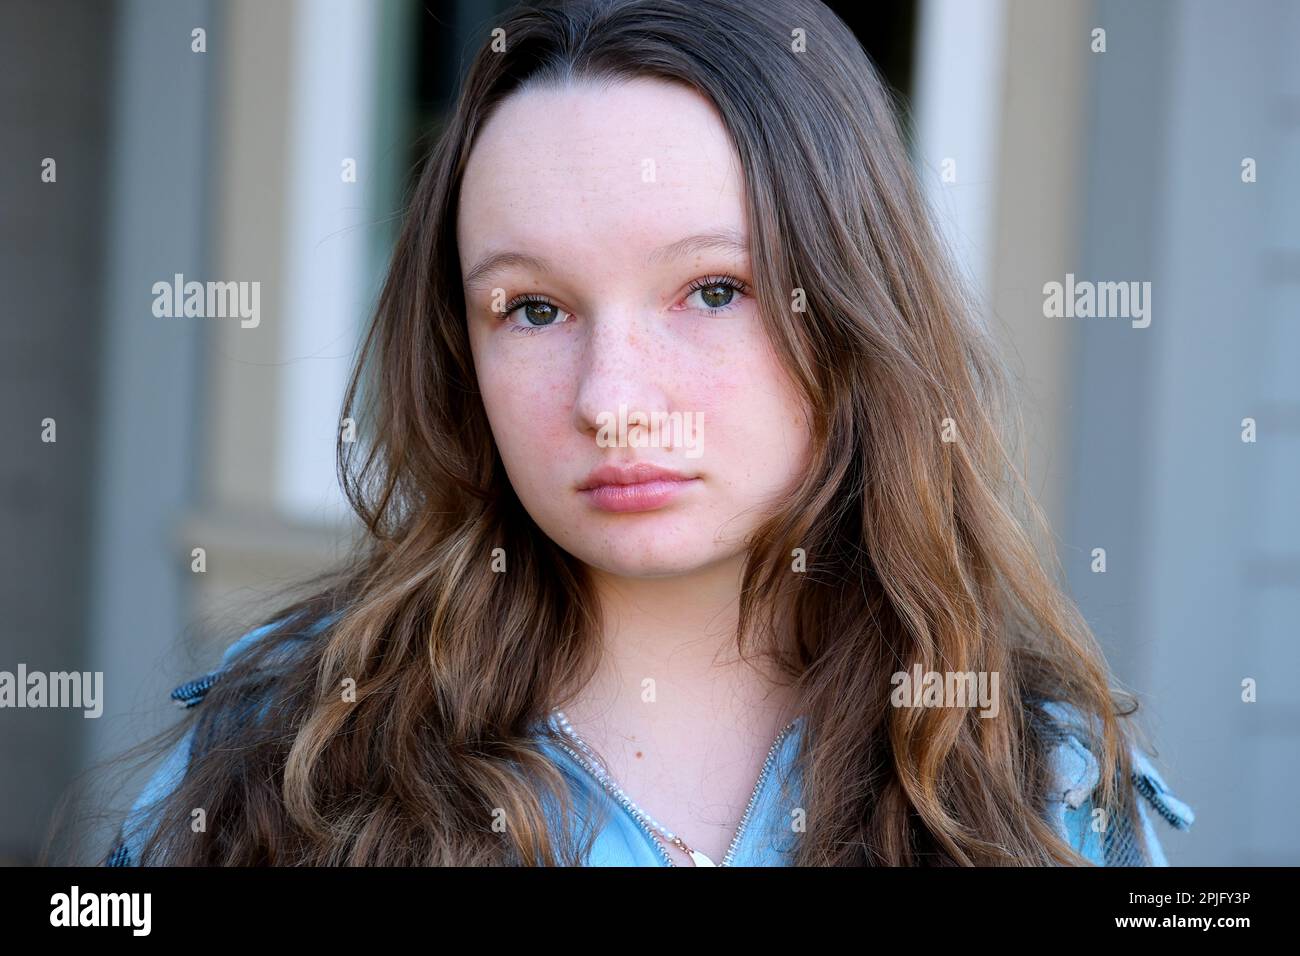 Calm serious beautiful millennial American woman with thick hair looking forward at camera posing indoors. Attractive focused young adult gen z lady face without smile. Close up portrait. Stock Photo